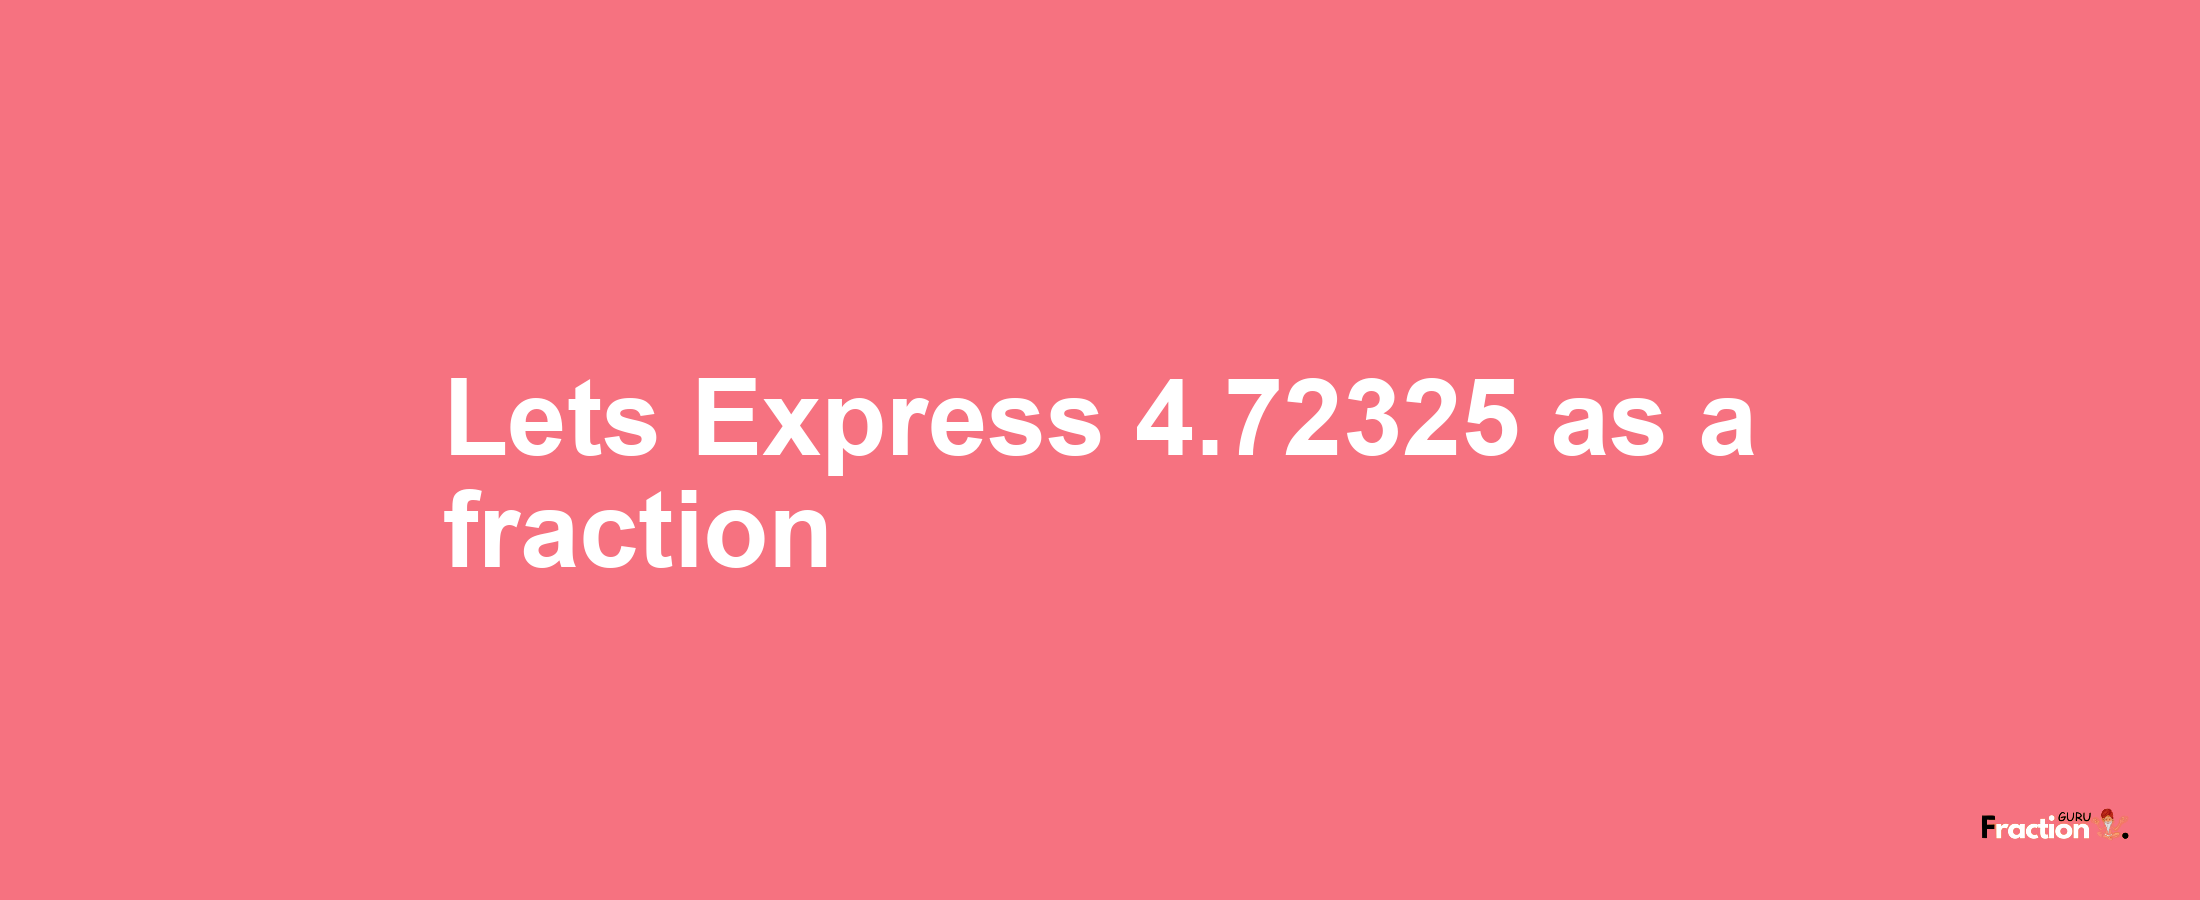 Lets Express 4.72325 as afraction